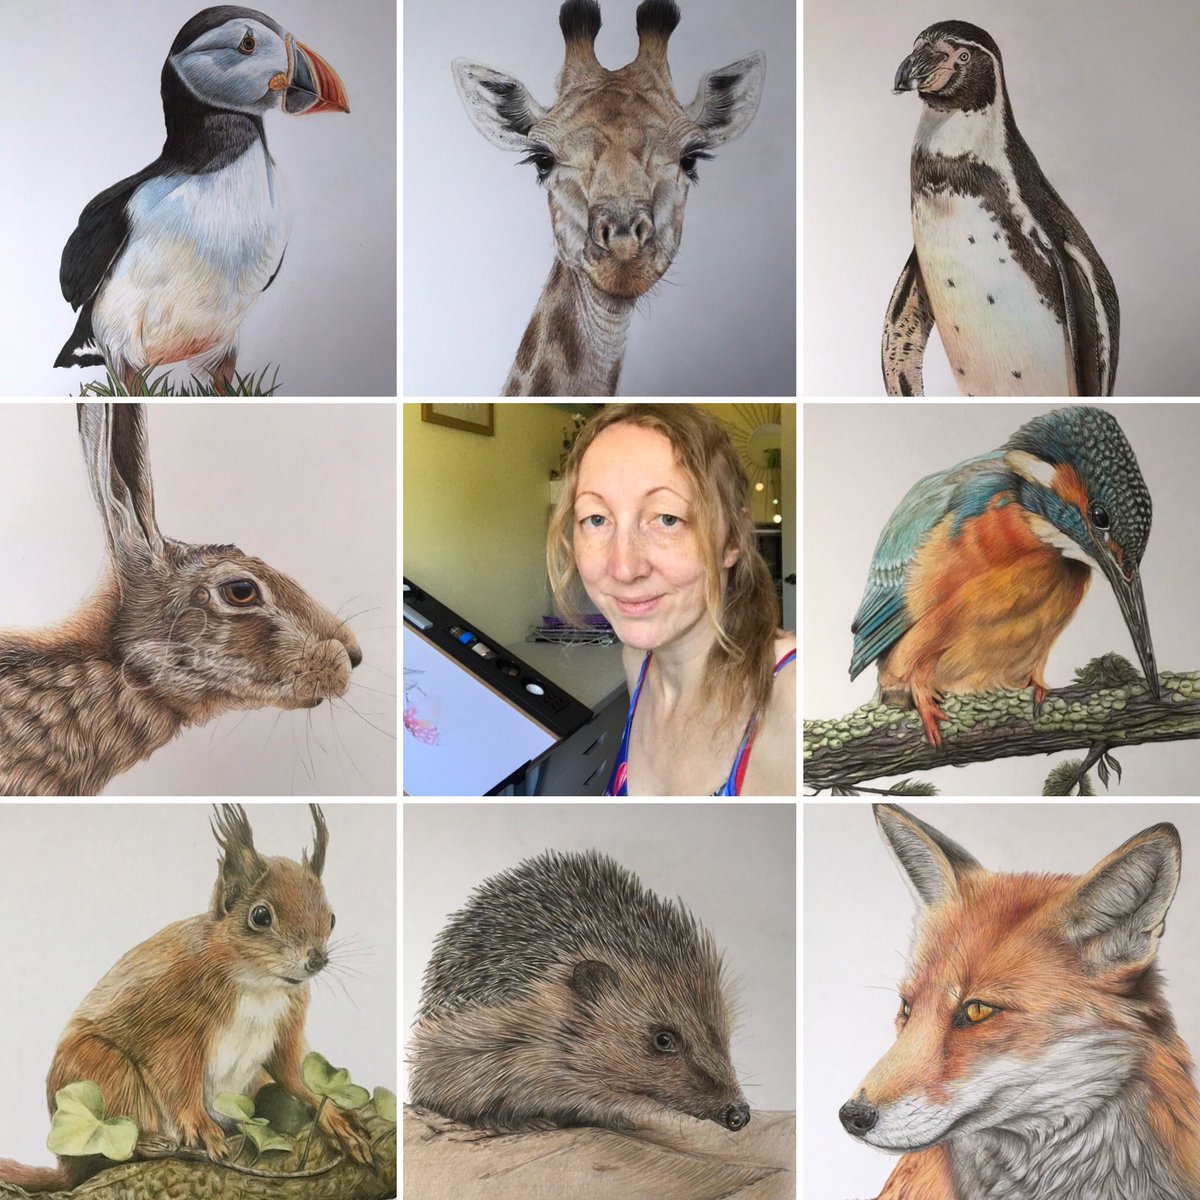 Some of my wildlife drawings from this year (+me). I’m so grateful to all of my customers. You don’t know how much each purchase means to me! I’ve not made a penny in the past few weeks though, but am really hoping that things will pick up next year🤞. #drawing #artvartist2021